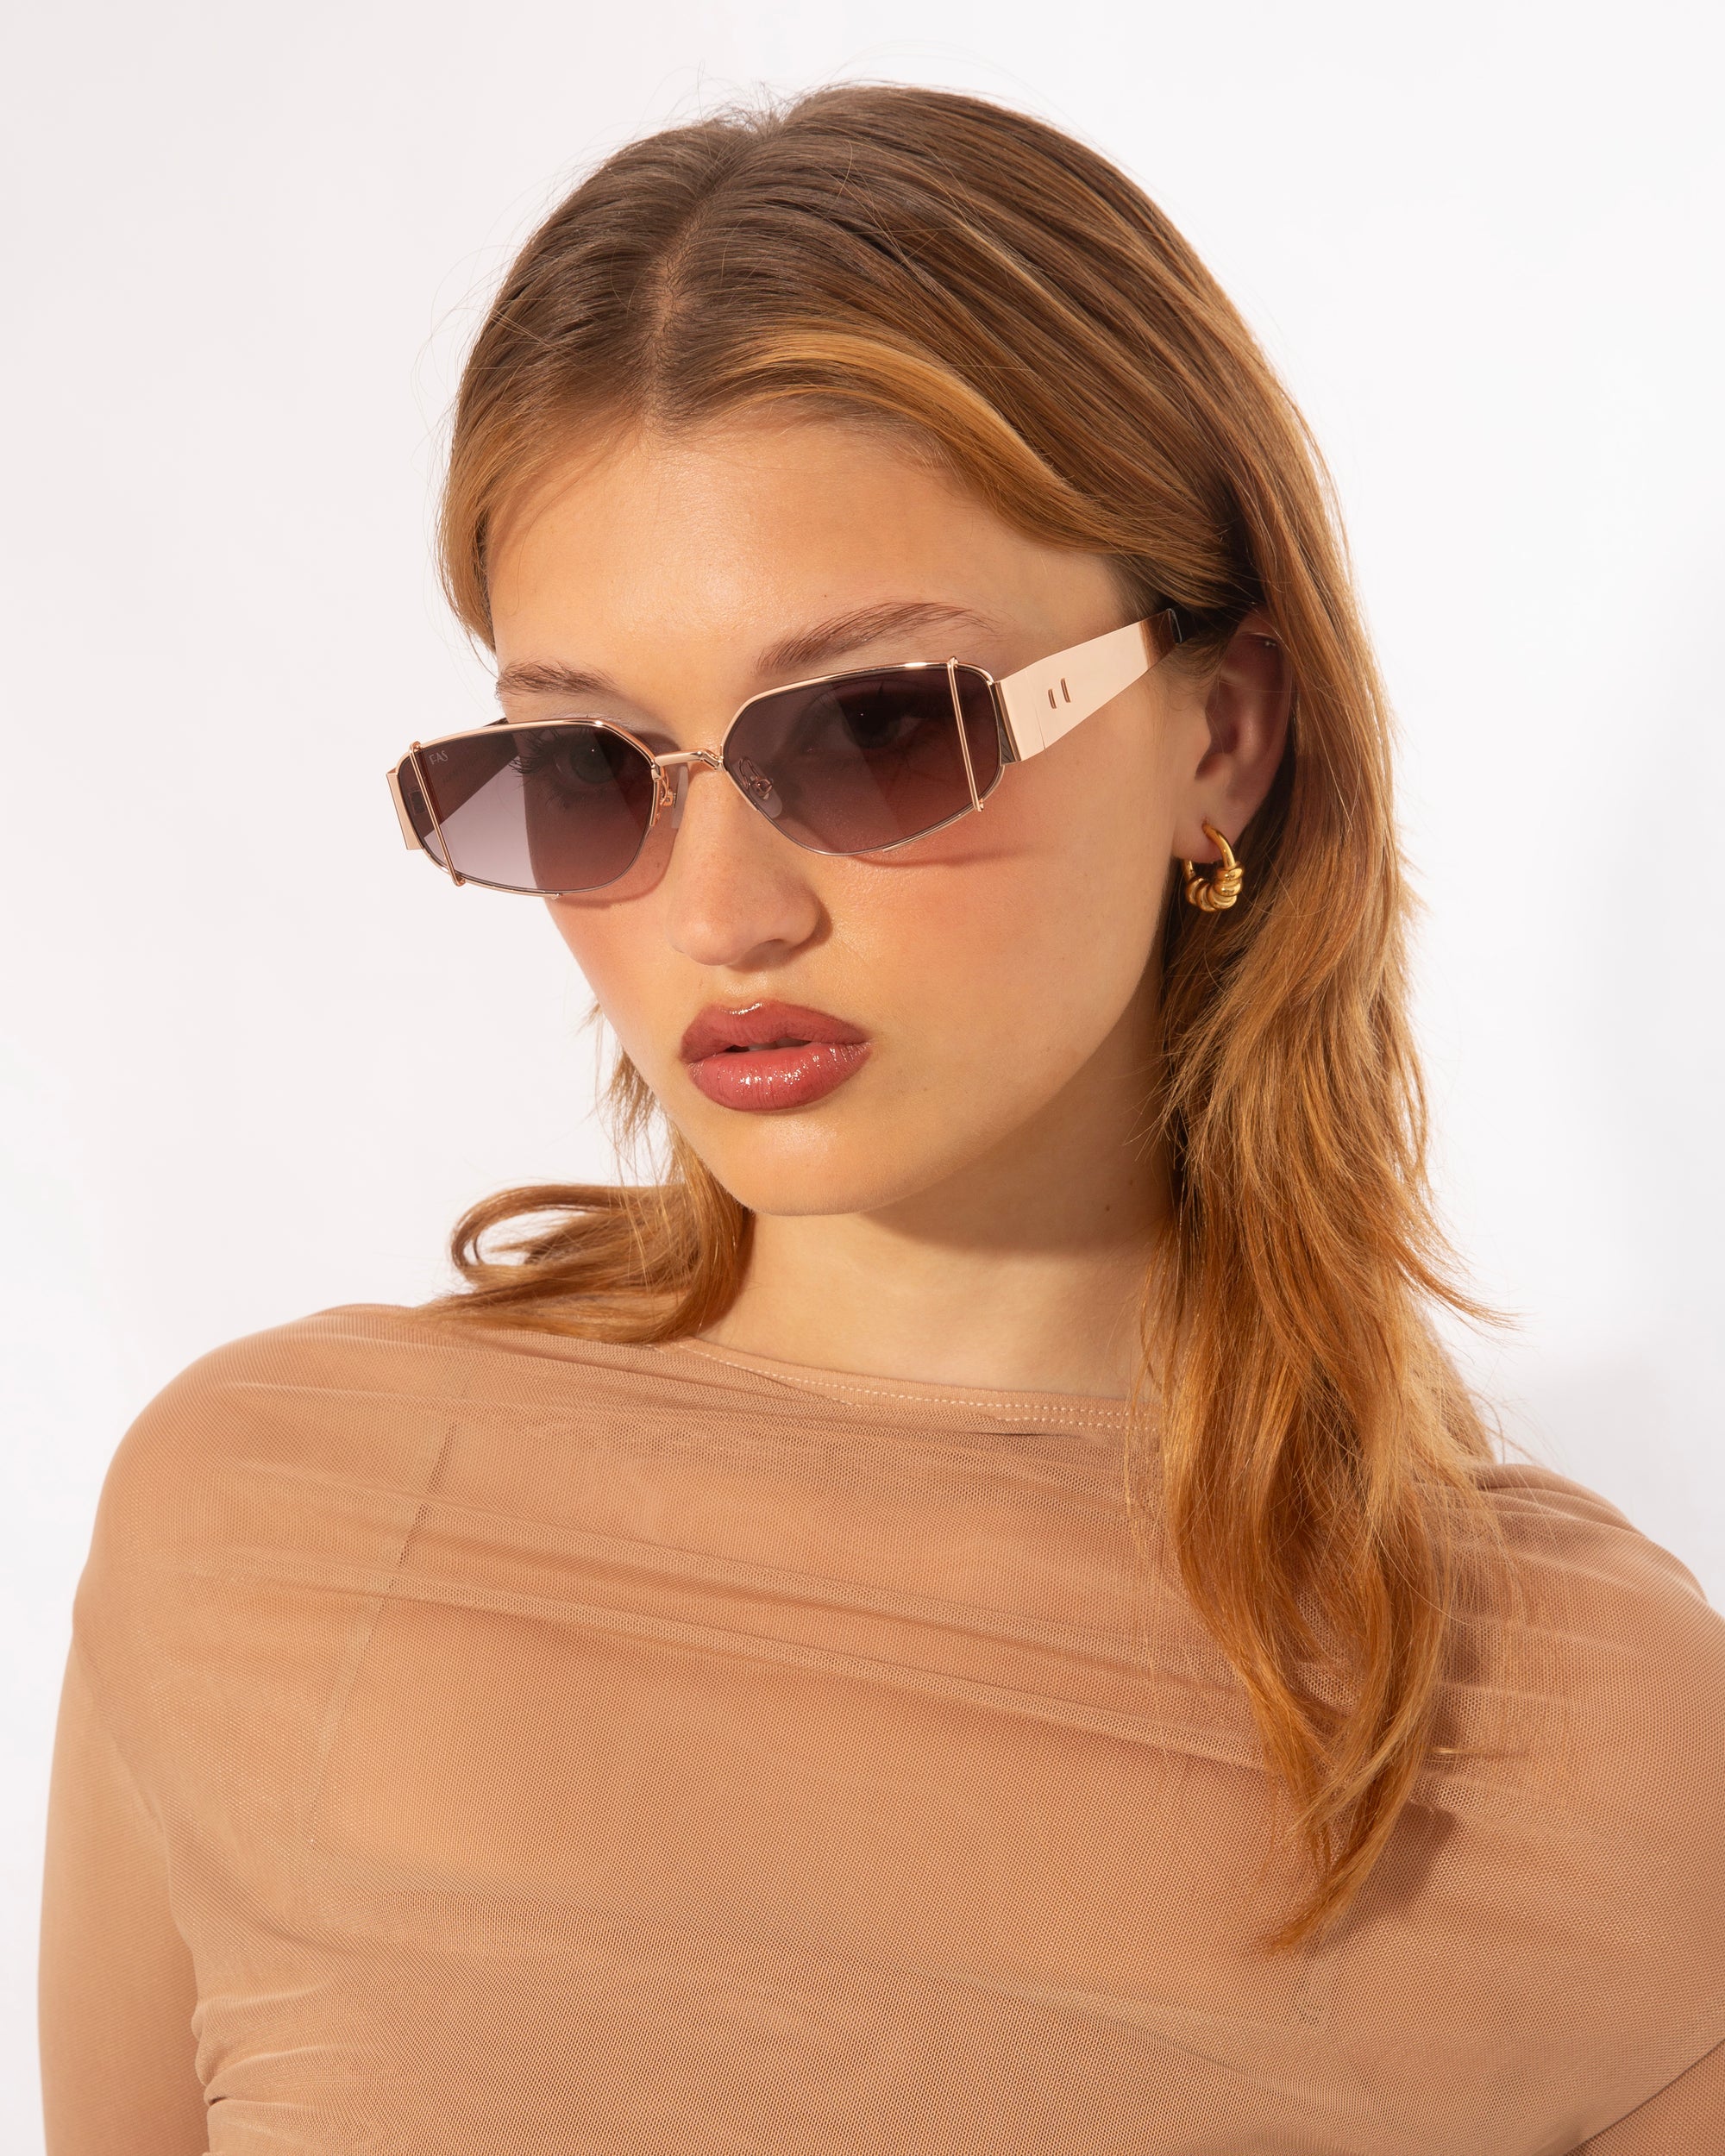 A person with long, light brown hair is wearing rectangular, gradient-lens sunglasses with full metal frames from For Art's Sake® called Talia. They are also wearing a sheer, light brown top and 18-karat gold hoop earrings. The background is plain white.